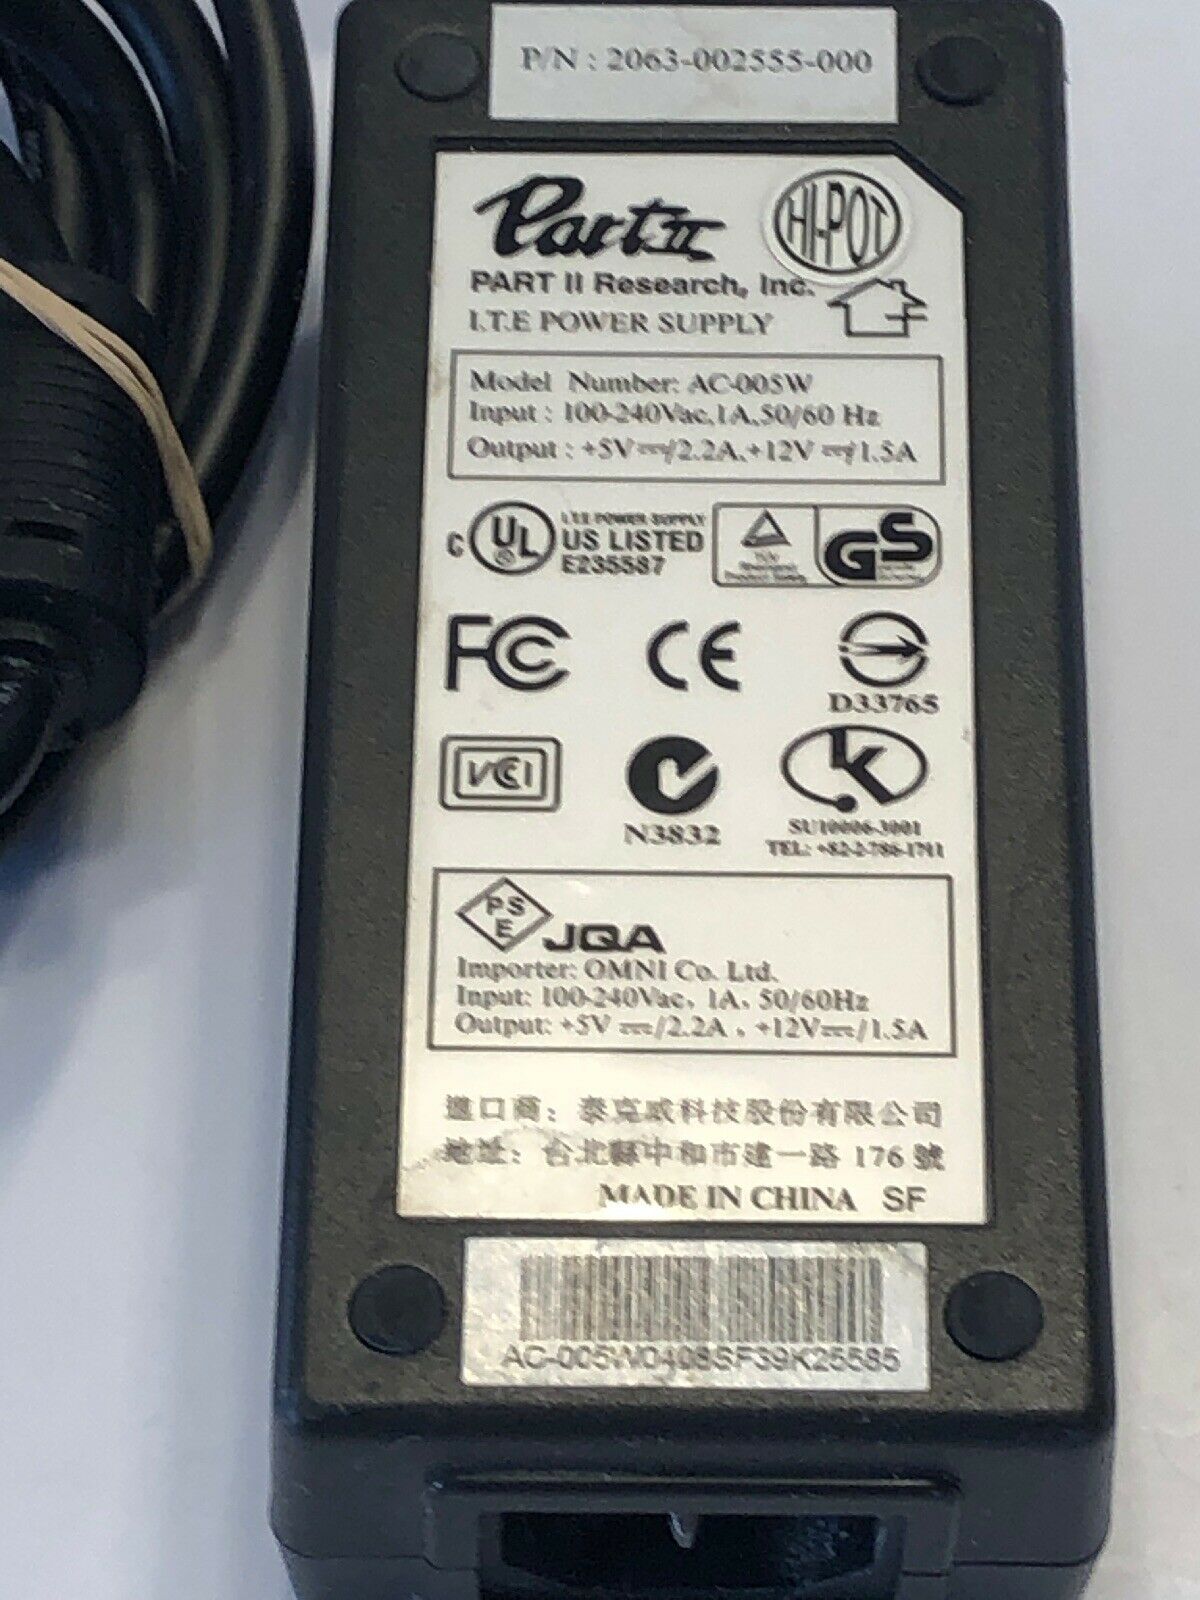 NEW 5V 2.2A 12V 1.5A PART II Research AC-005W 2063-002555-001 4-Pin AC Adapter - Click Image to Close